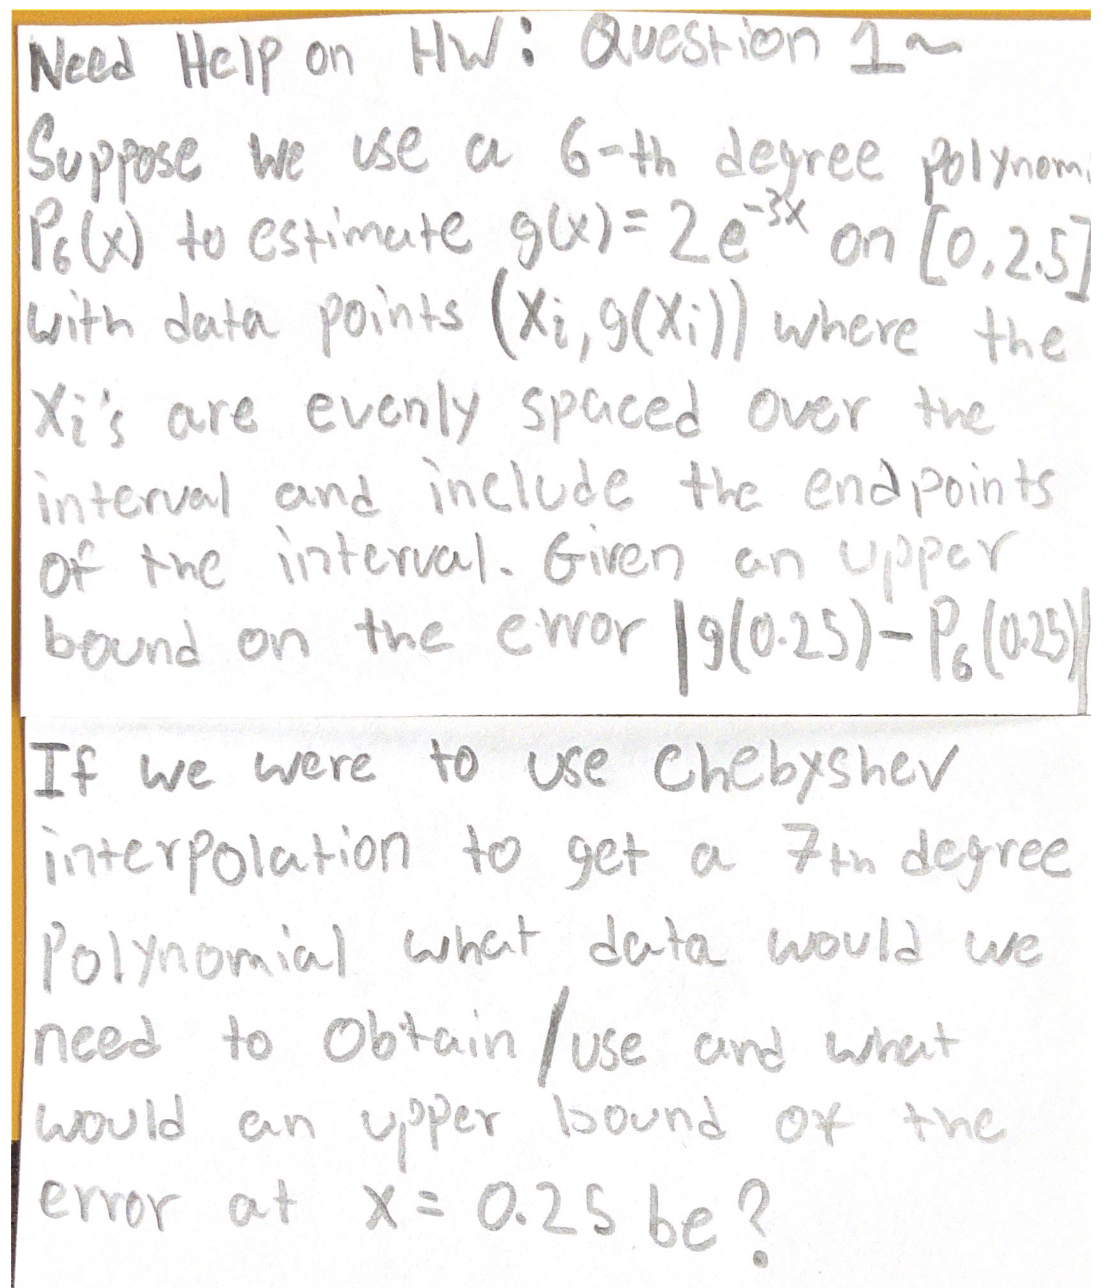 Need Help on HWi Question ~
Supose we use a 6-th deyree polynom
PeW to estimete g)=2e* on [0,257
with data points (Xi,9(X;)) where the
X:'s are evenly spaced over the
interval and include the end points
of the interval. Given an upper
the eror
bound on 190-25)-Po(02)
If we were to use Chebyshev
interpolation to get a 7in degree
Polynomial what data would we
need to Obtain /use and wrent
would ean uper bound Of the
error at X= 0.25 be ?
